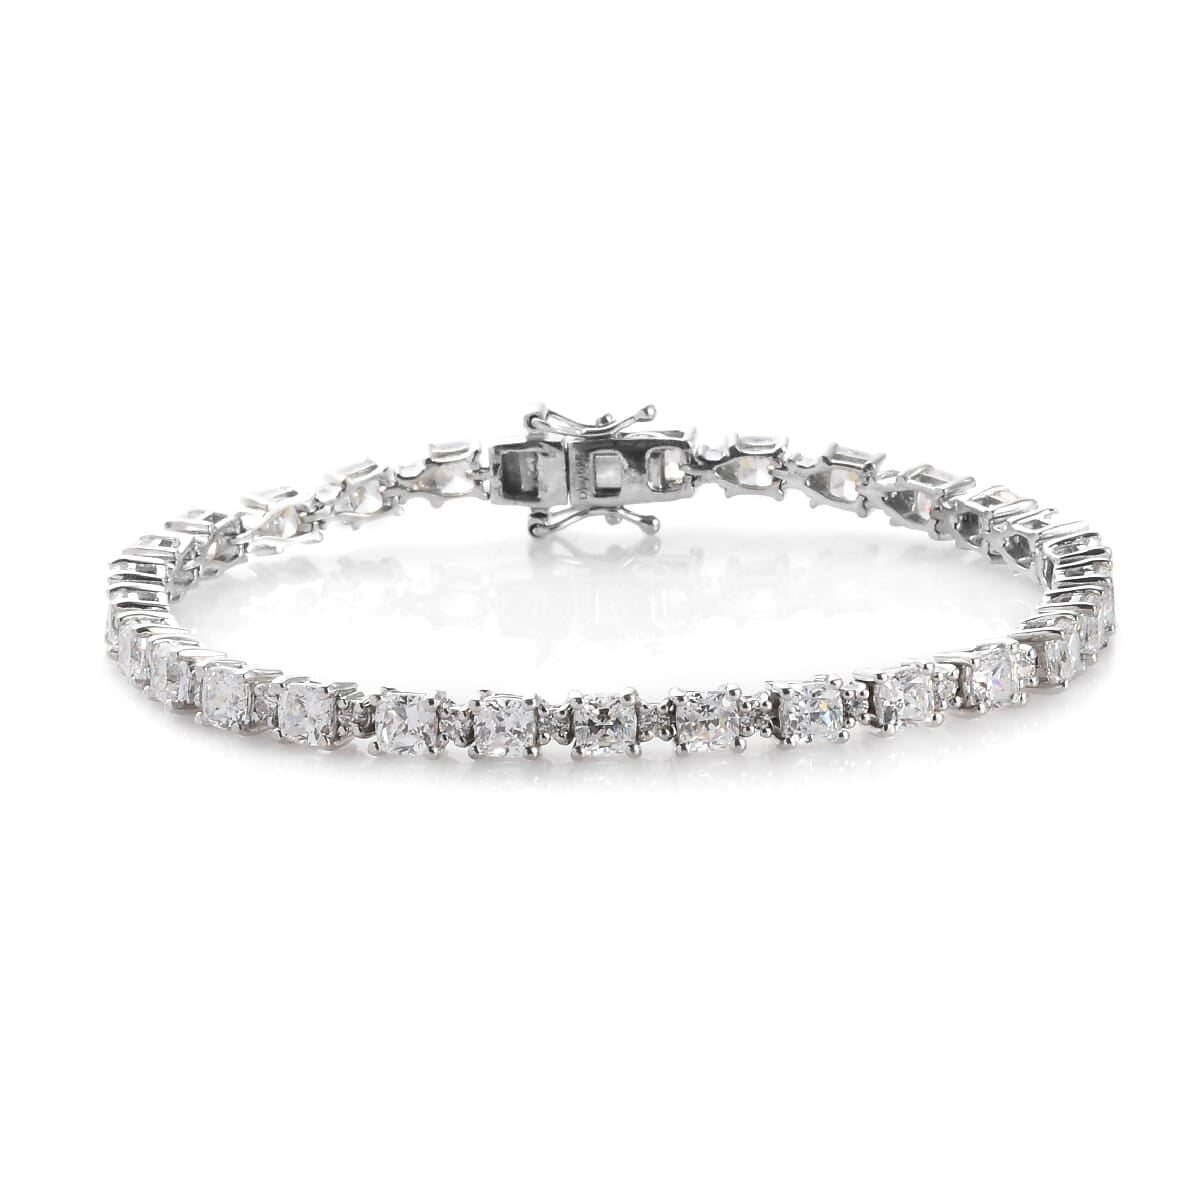 Lustro Stella 925 Sterling Silver Ct 30.2 Made with Swarovski Zirconia Line Bracelet for Women Jewelry Gifts Size 7.25" Wedding Engagement Promise Anniversary